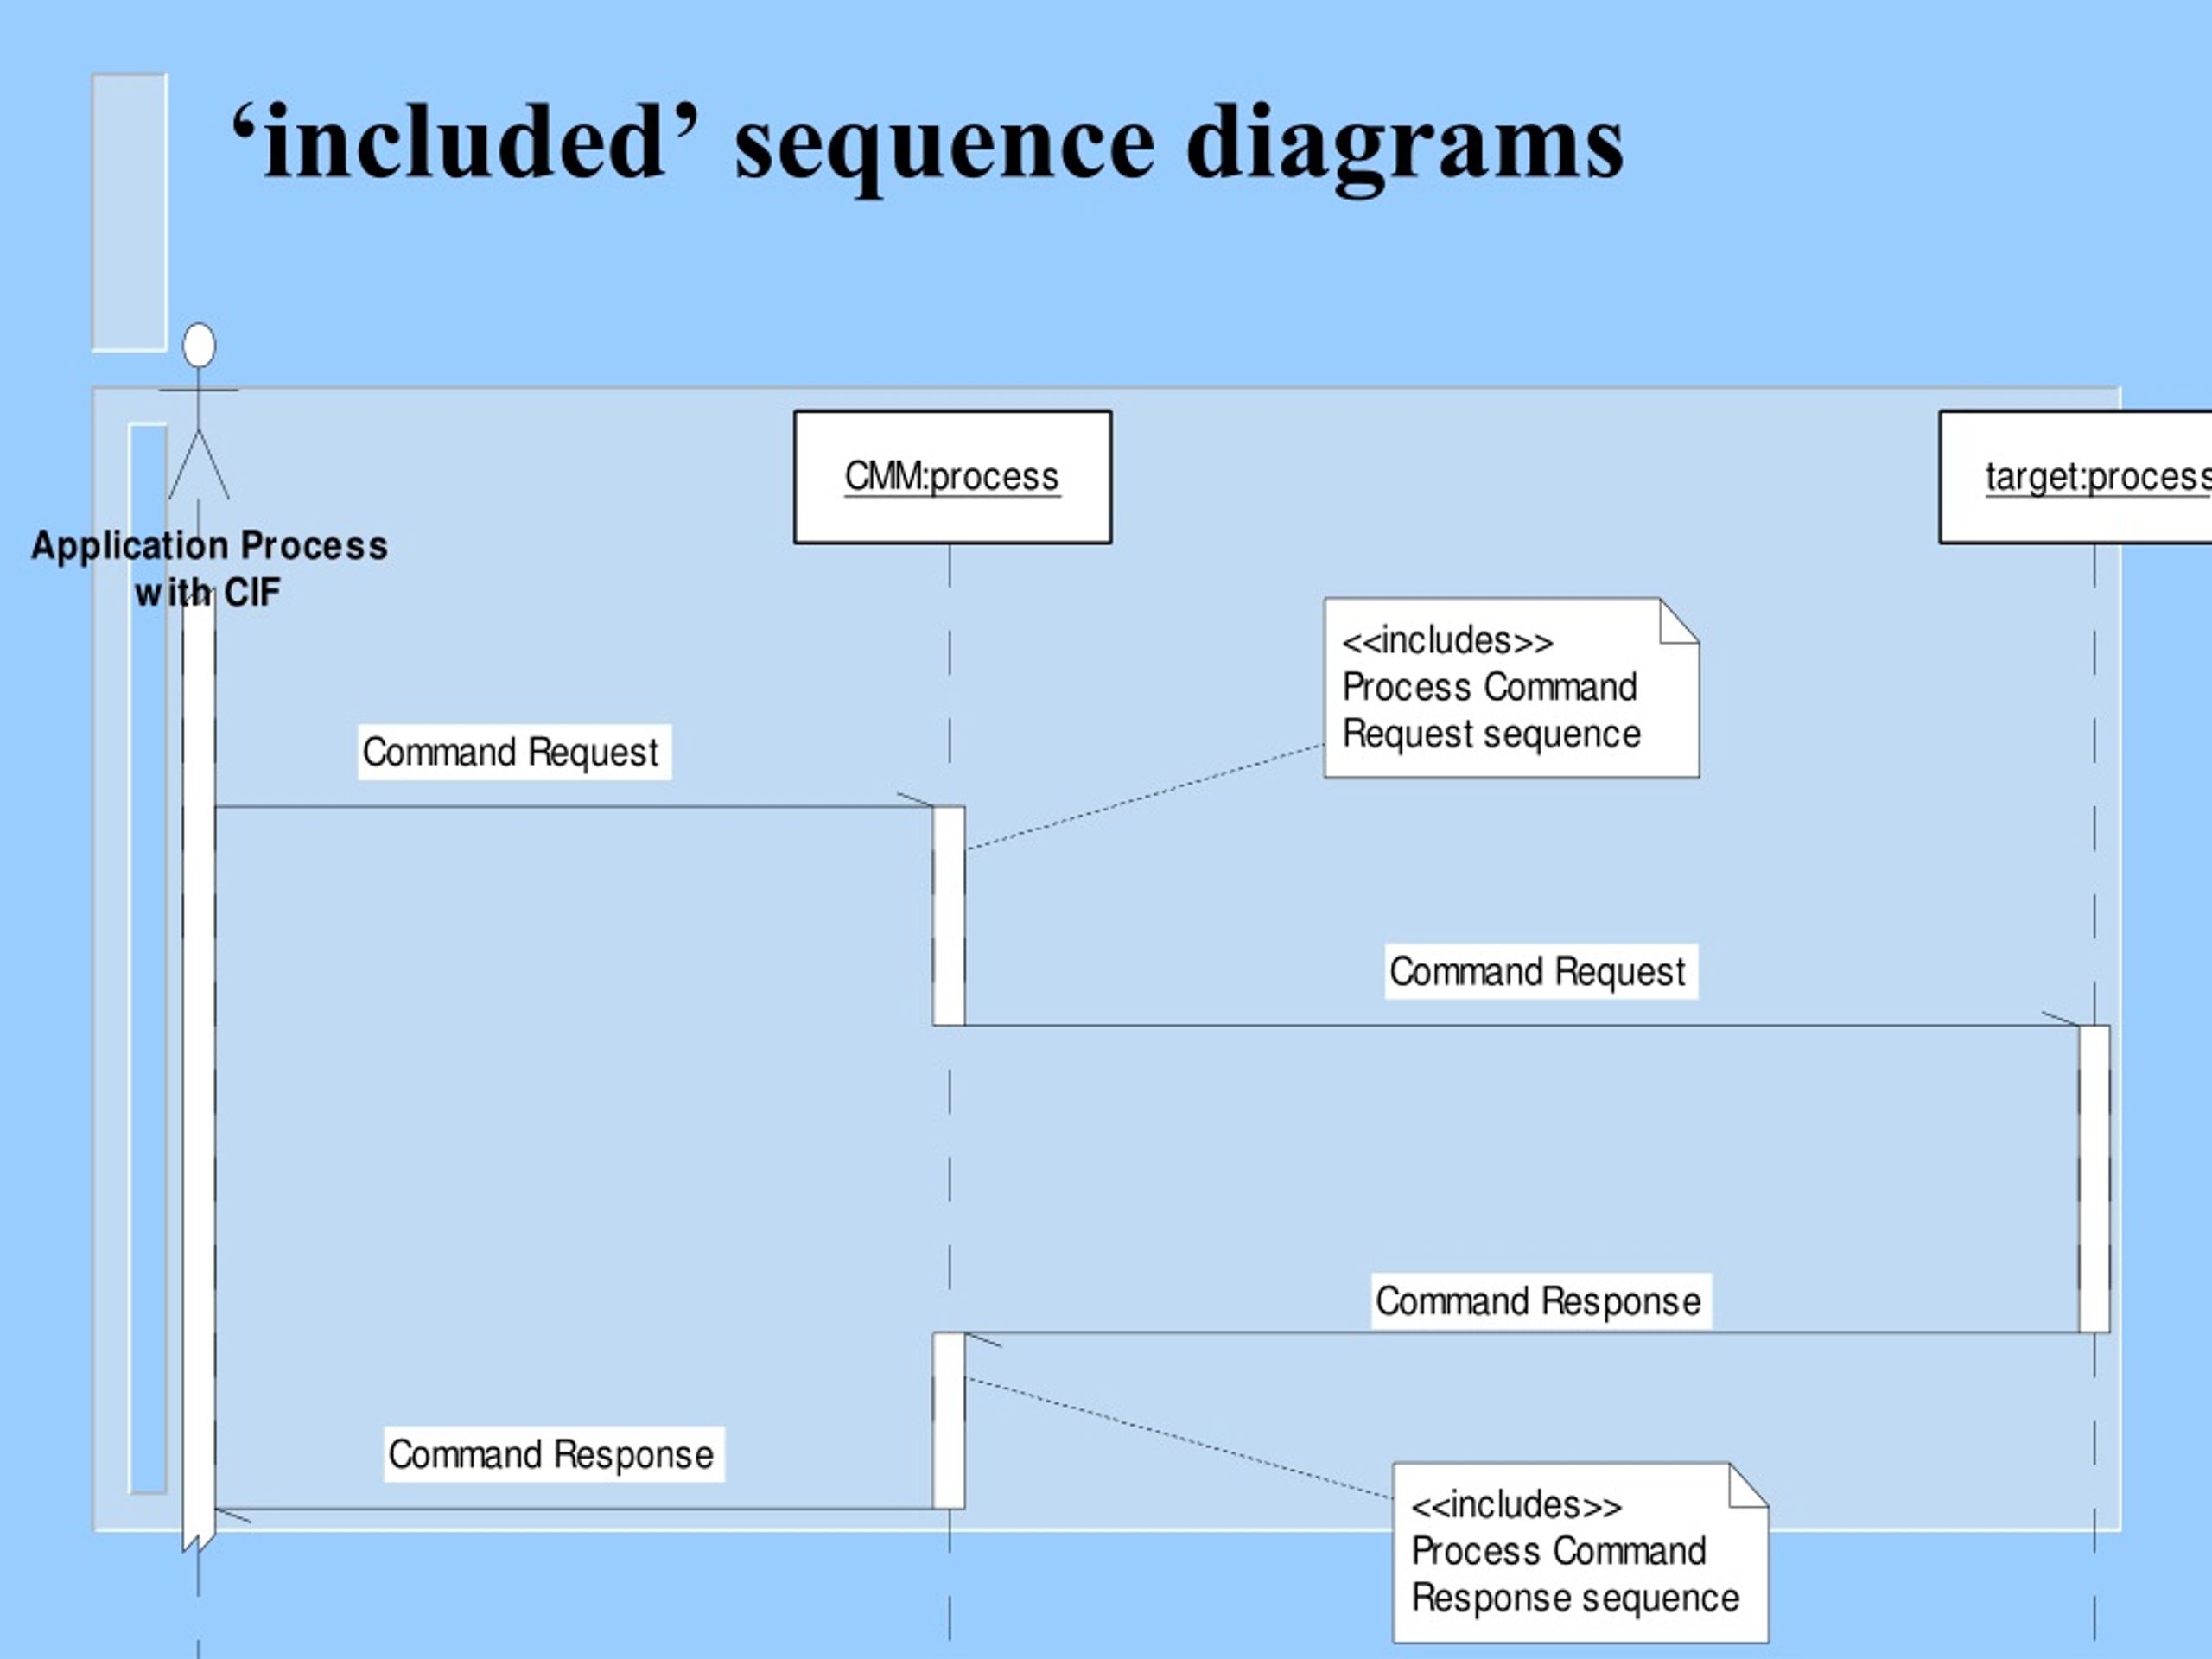 Ppt Uml Diagrams Sequence Diagrams The Requirements Model And The Dynamic Analysis Model 8641